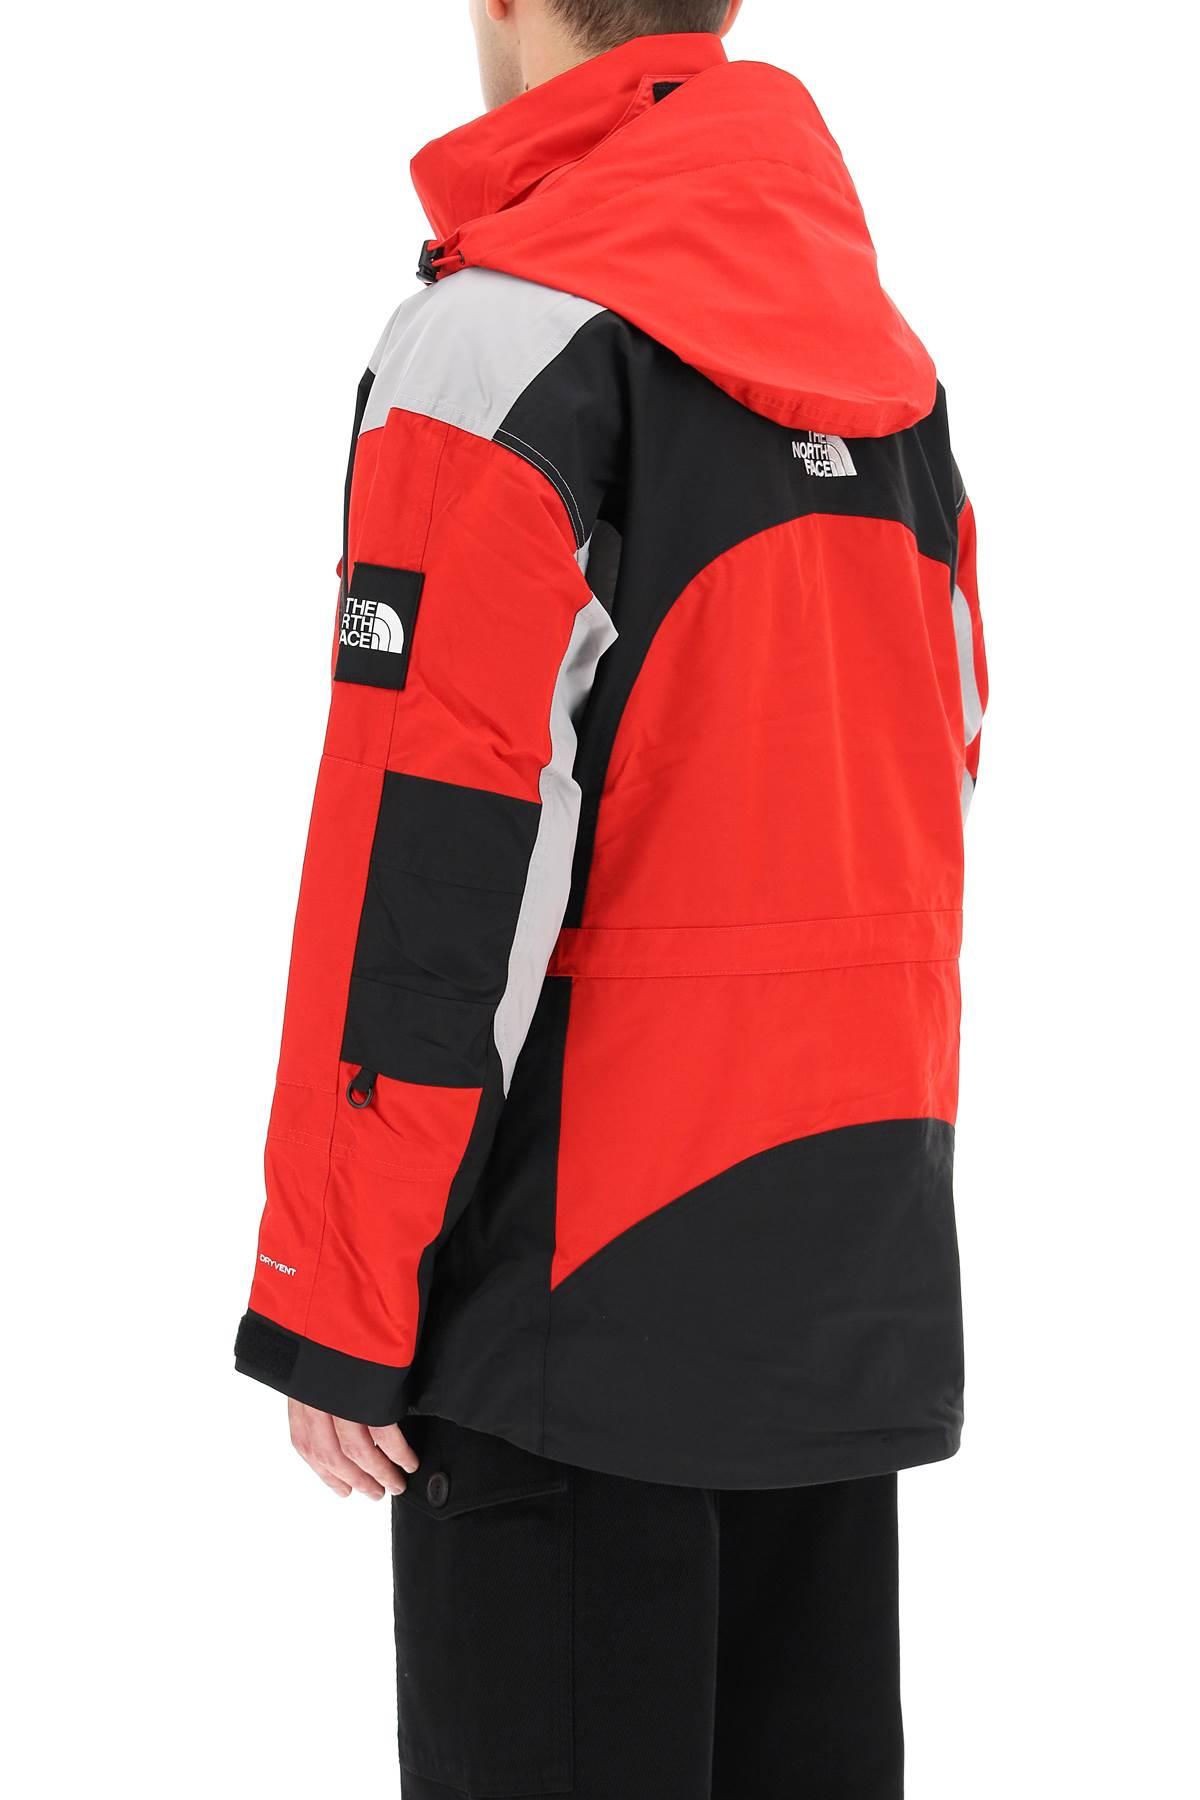 The North Face Synthetic Search & Rescue Dryvent Jacket in Red 